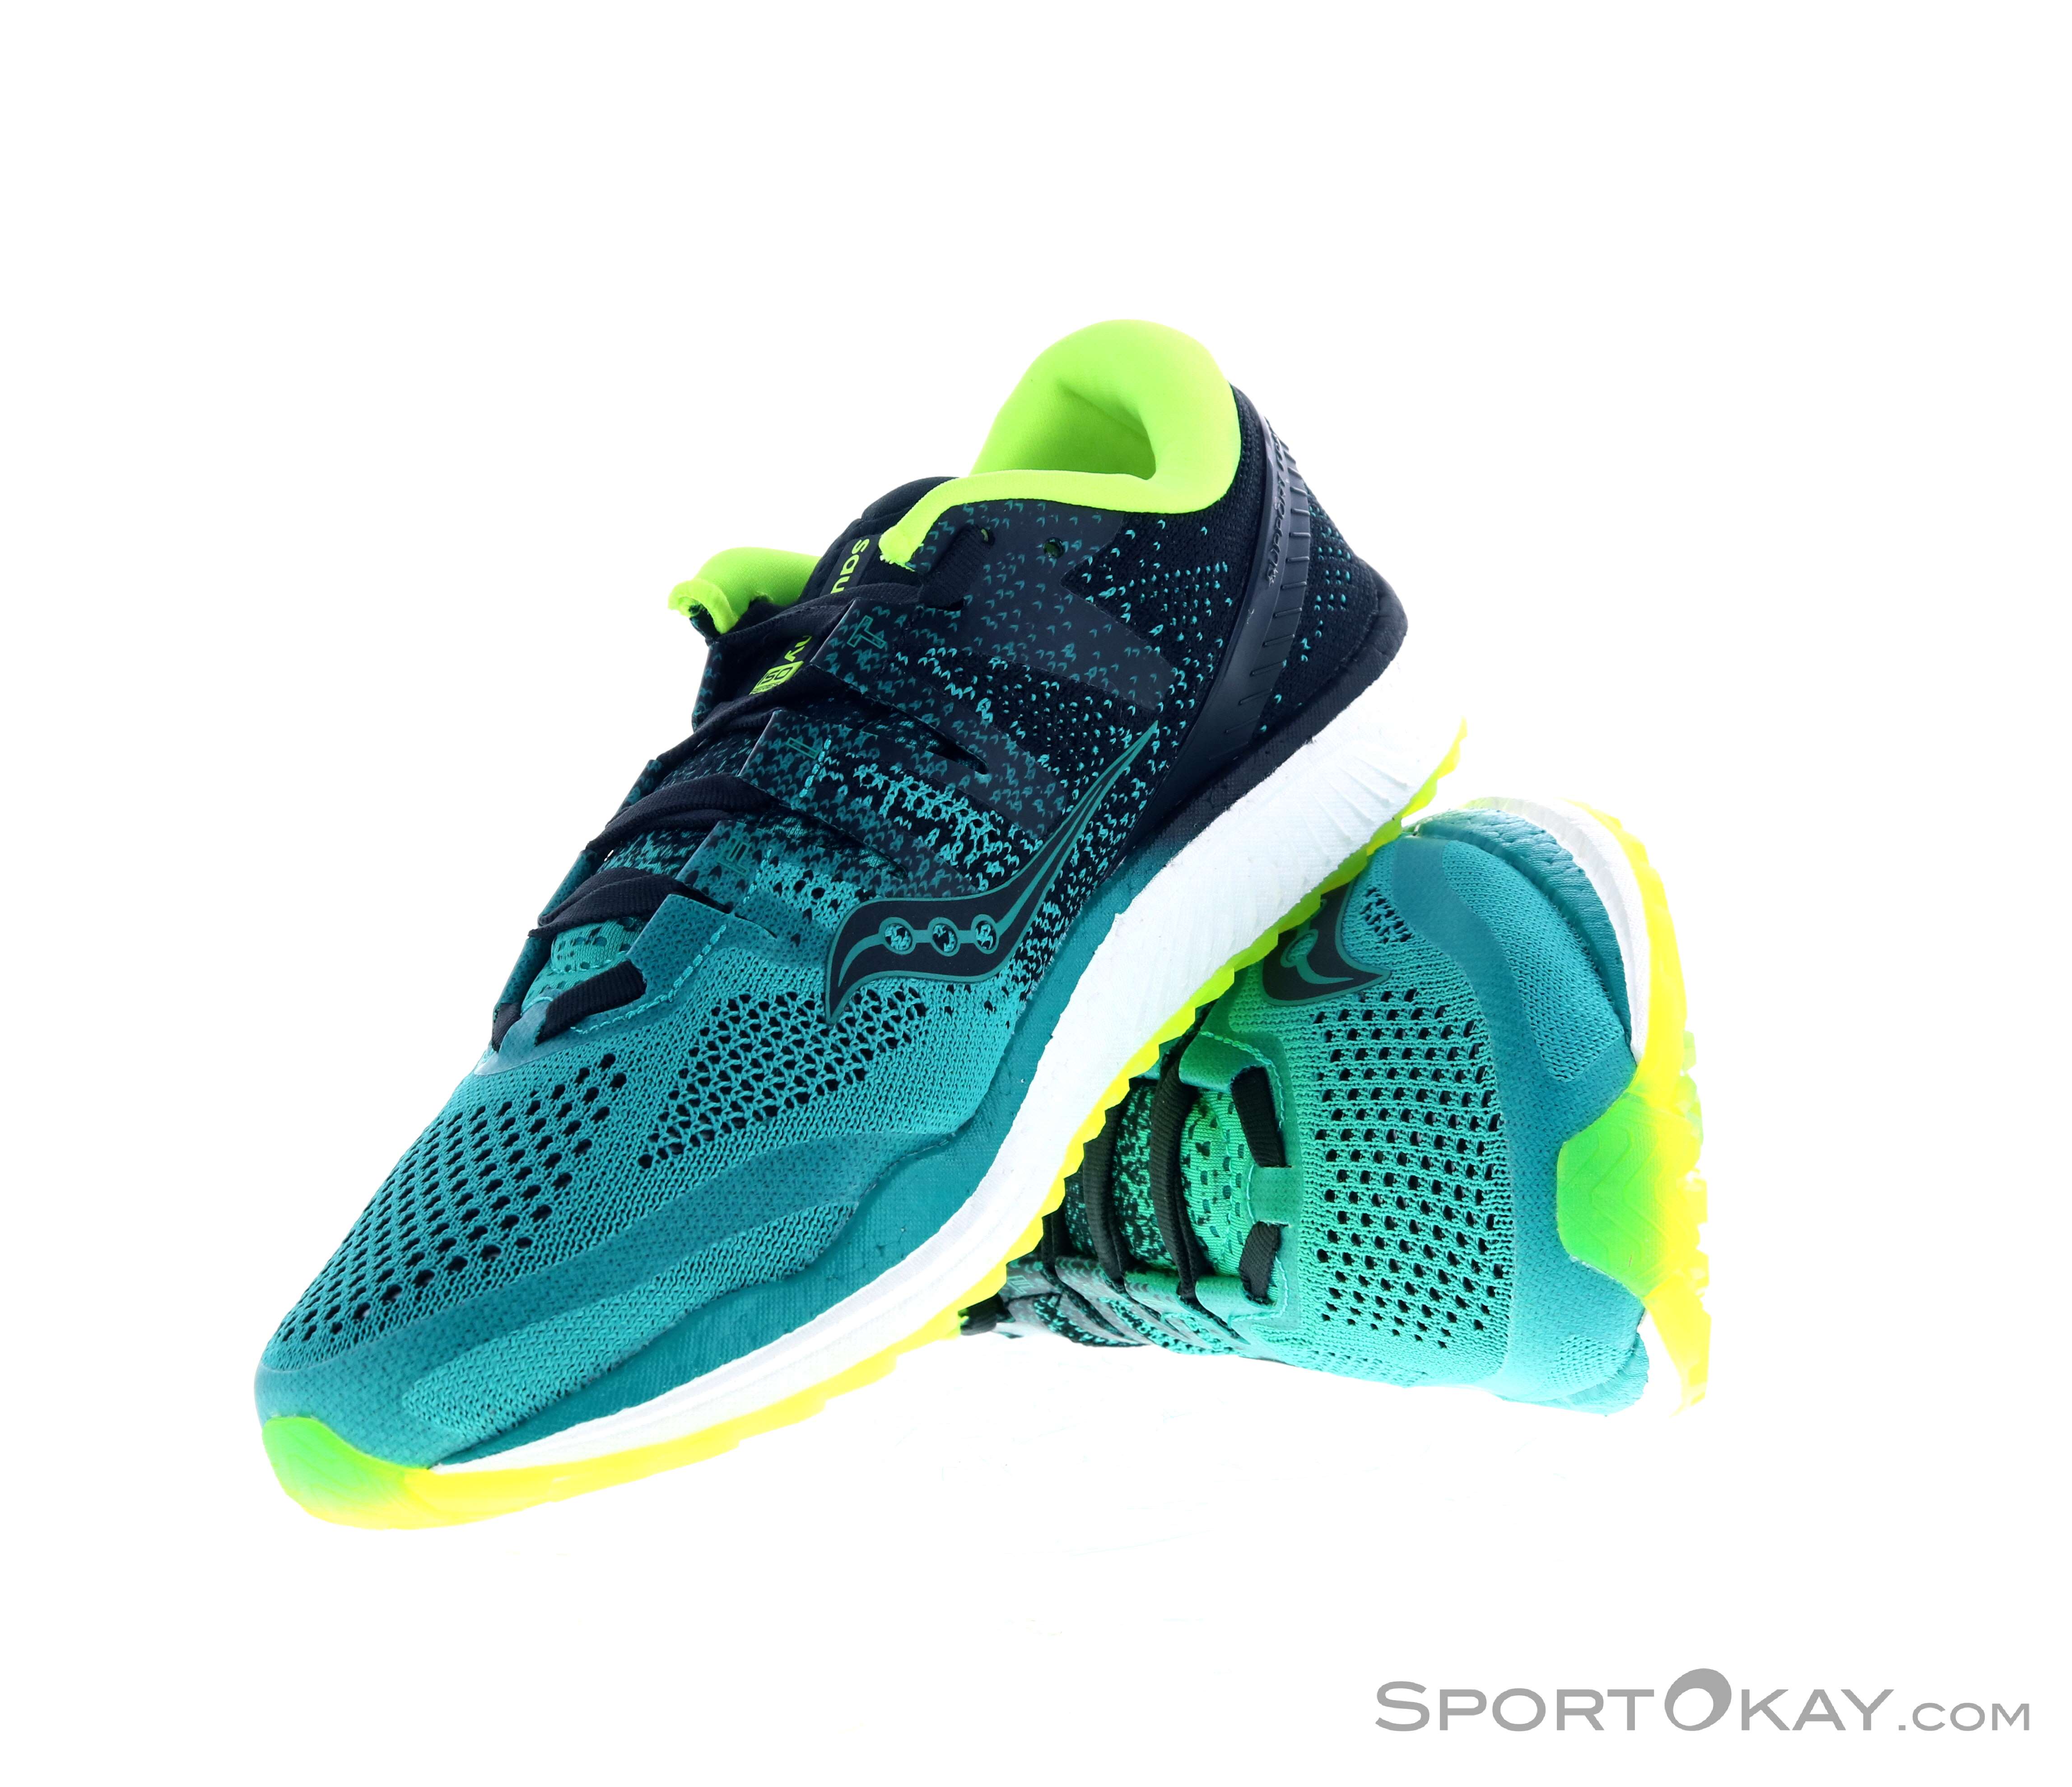 saucony mens running trainers